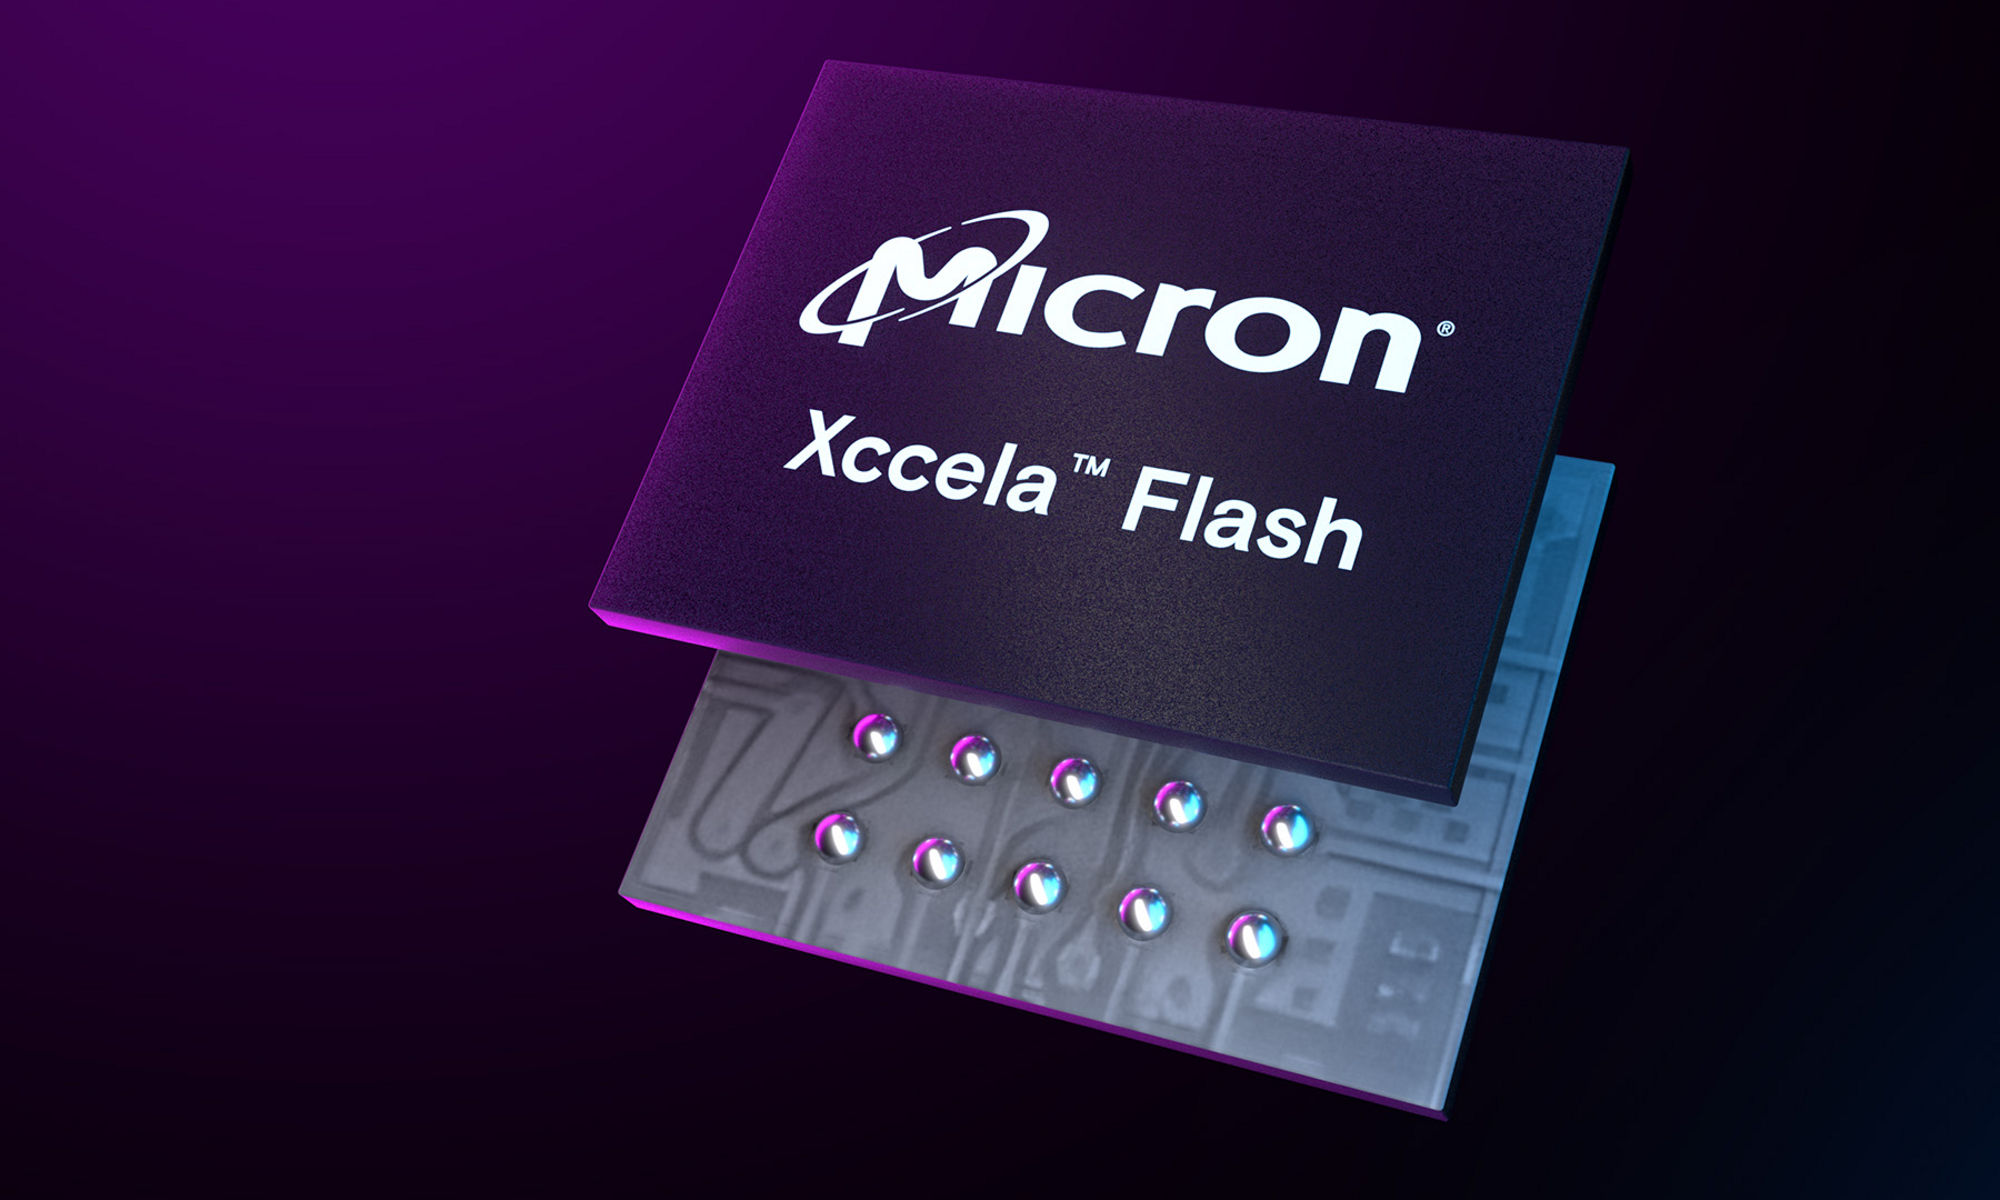 Xccela flash device front and back 